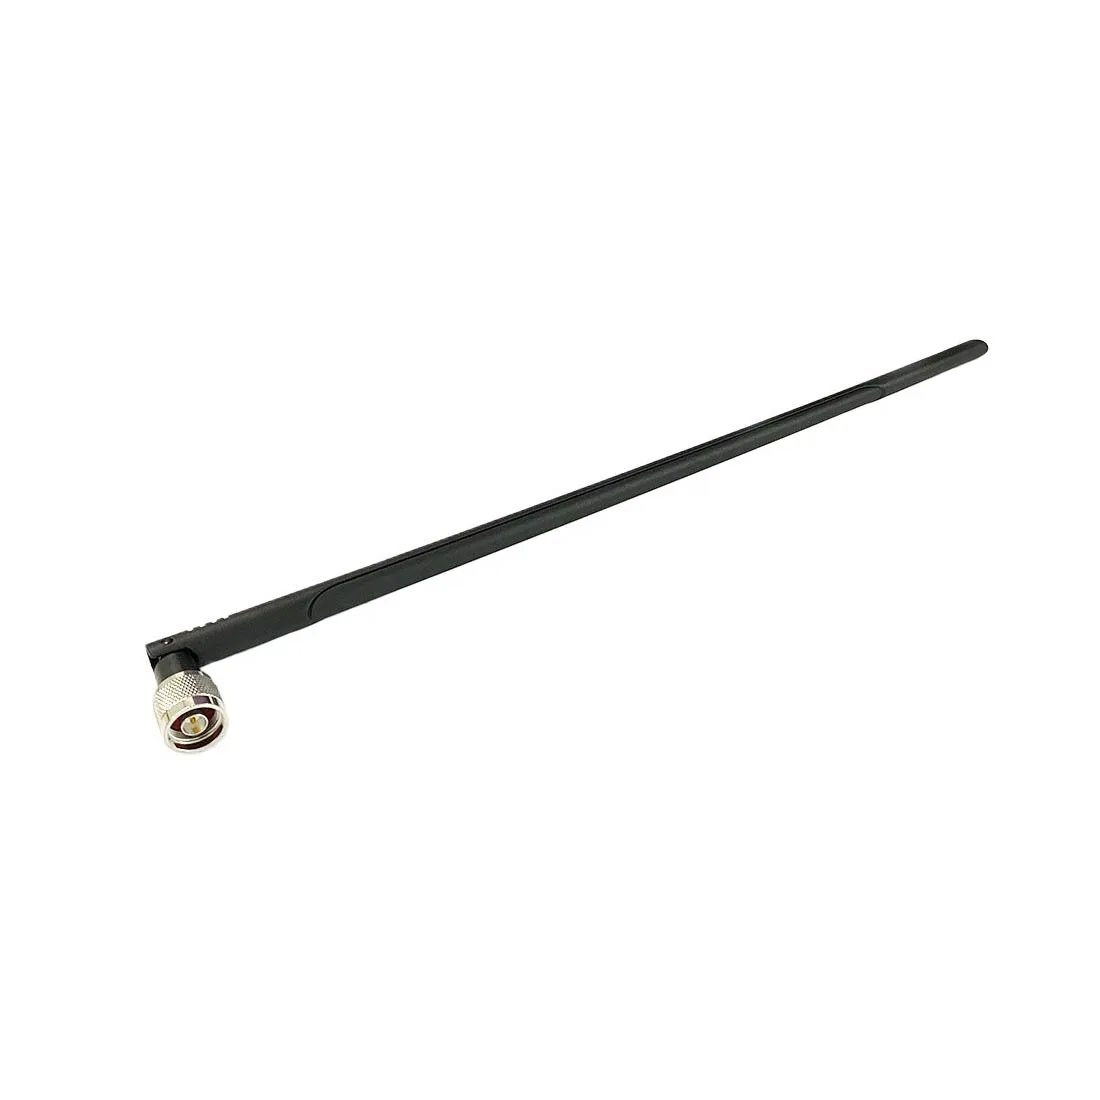 

2.4GHz 12dBi High Gain Omni Wifi Antenna N Male Aerial for Wireless Router 45cm Signal Booster New